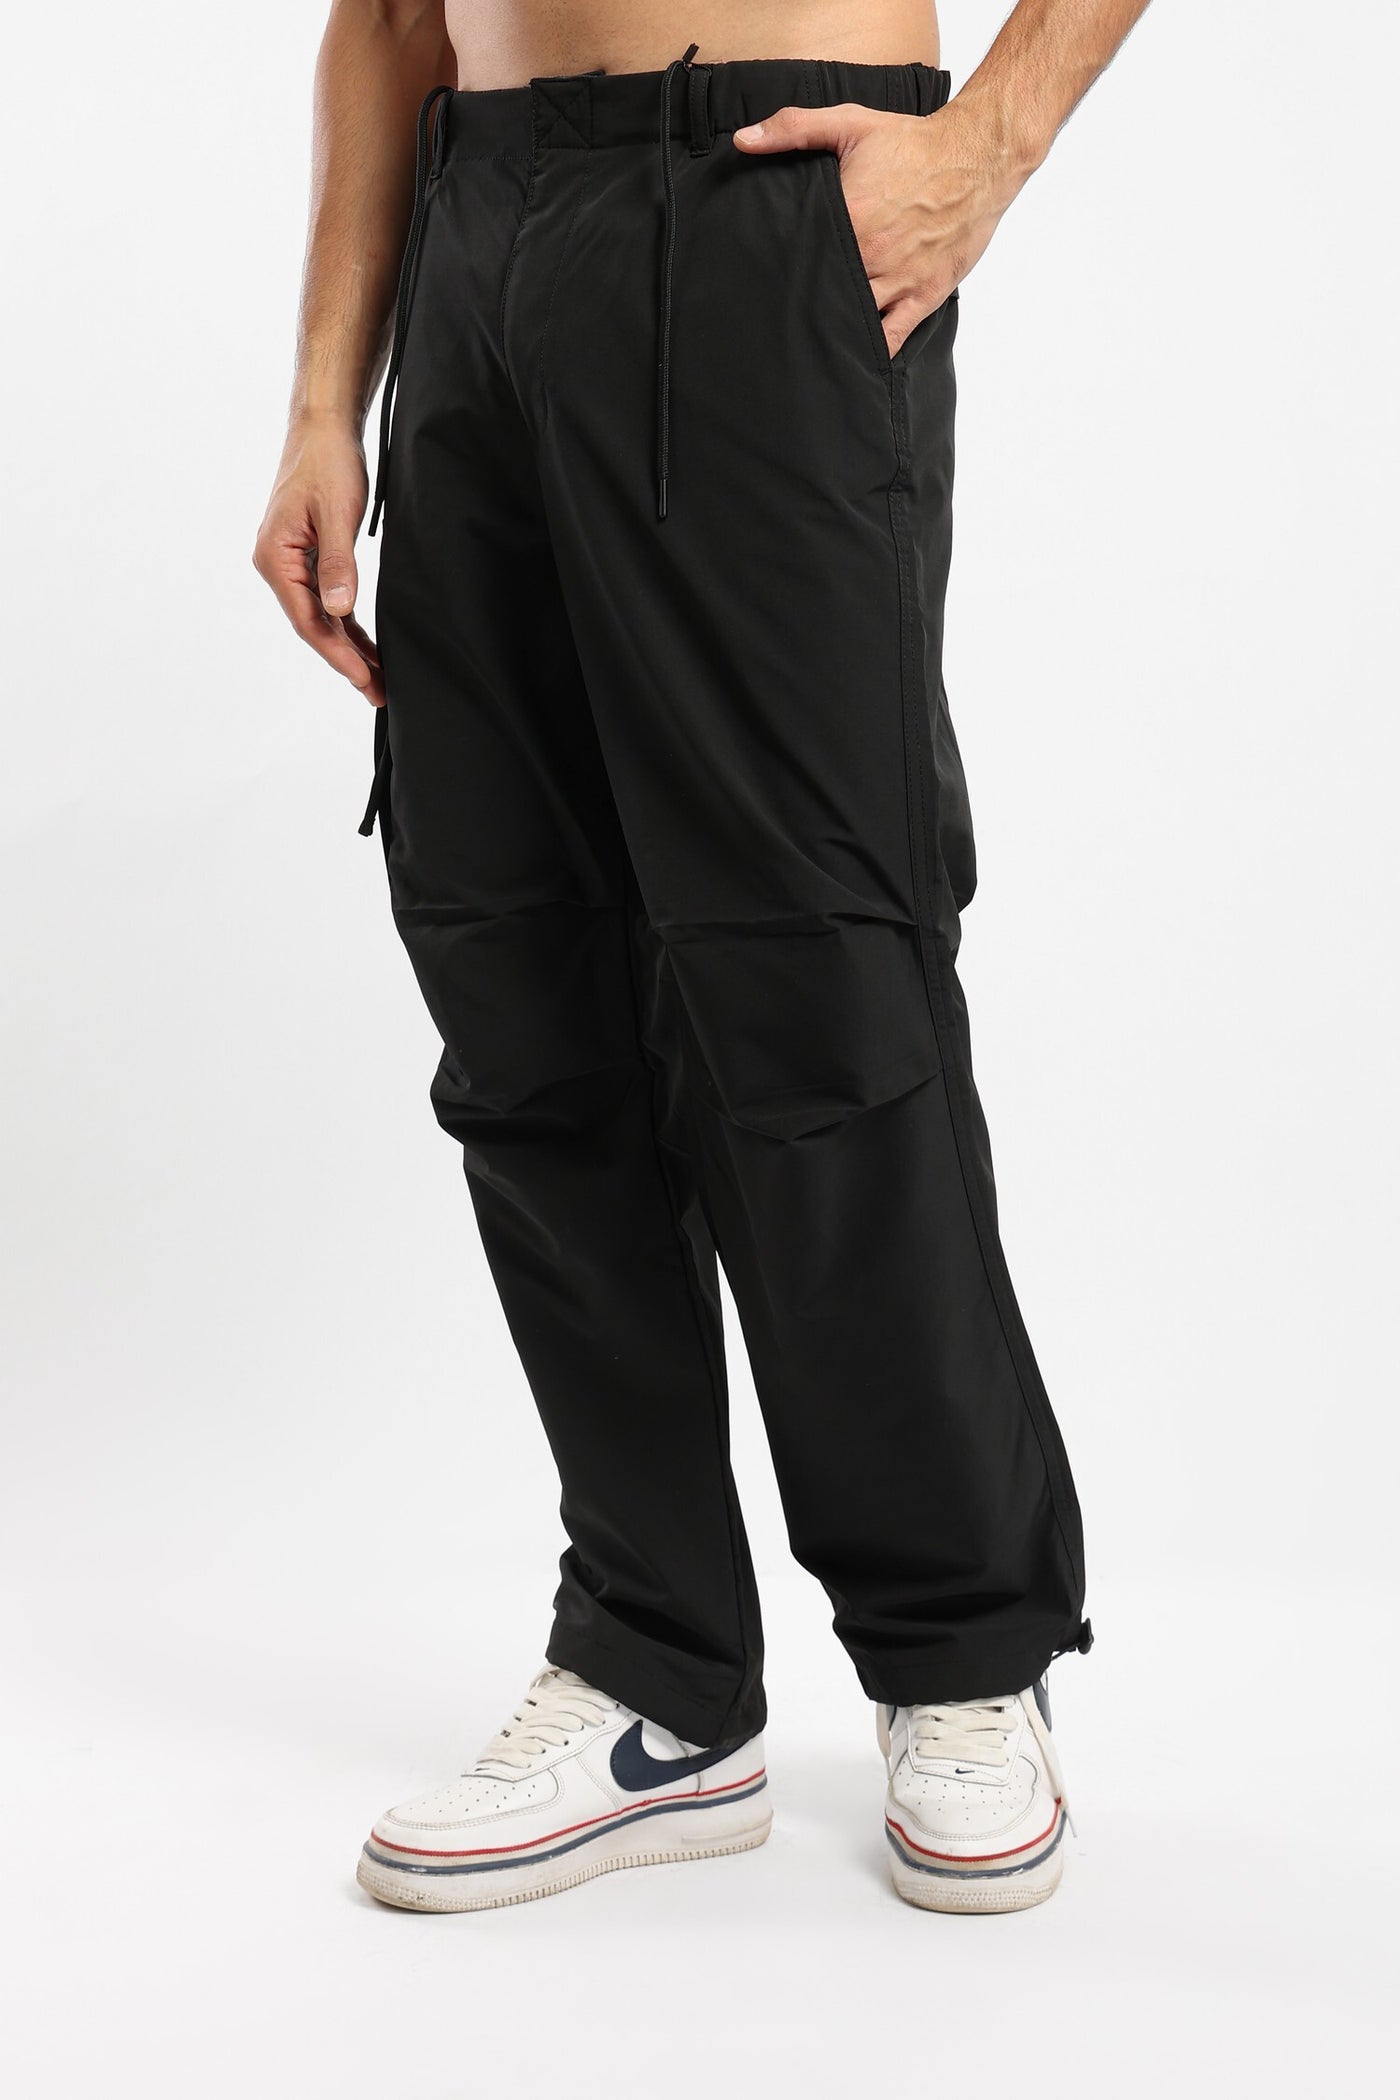 Parachute Pants - Waist and Pocket Stoppers